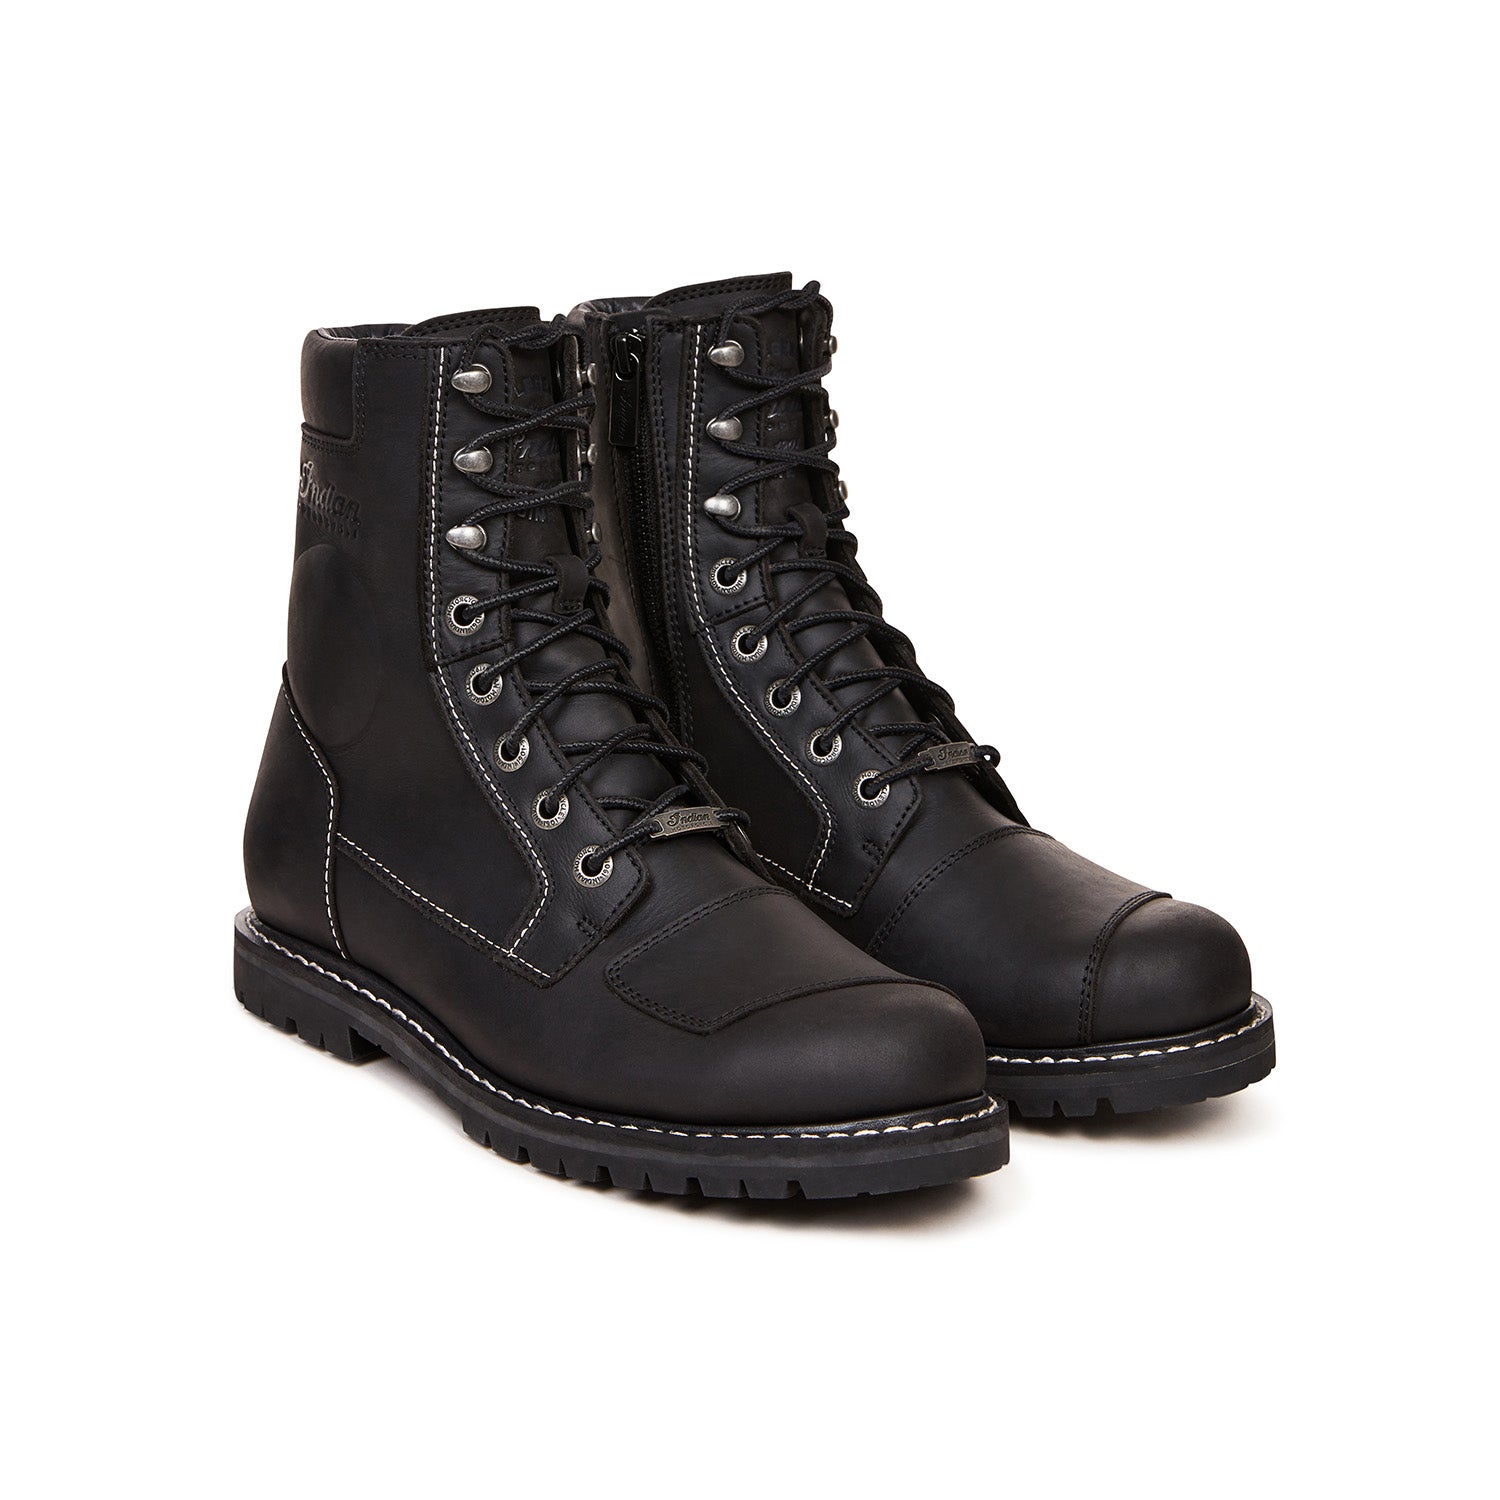 Women's Lace Up Boot, Black